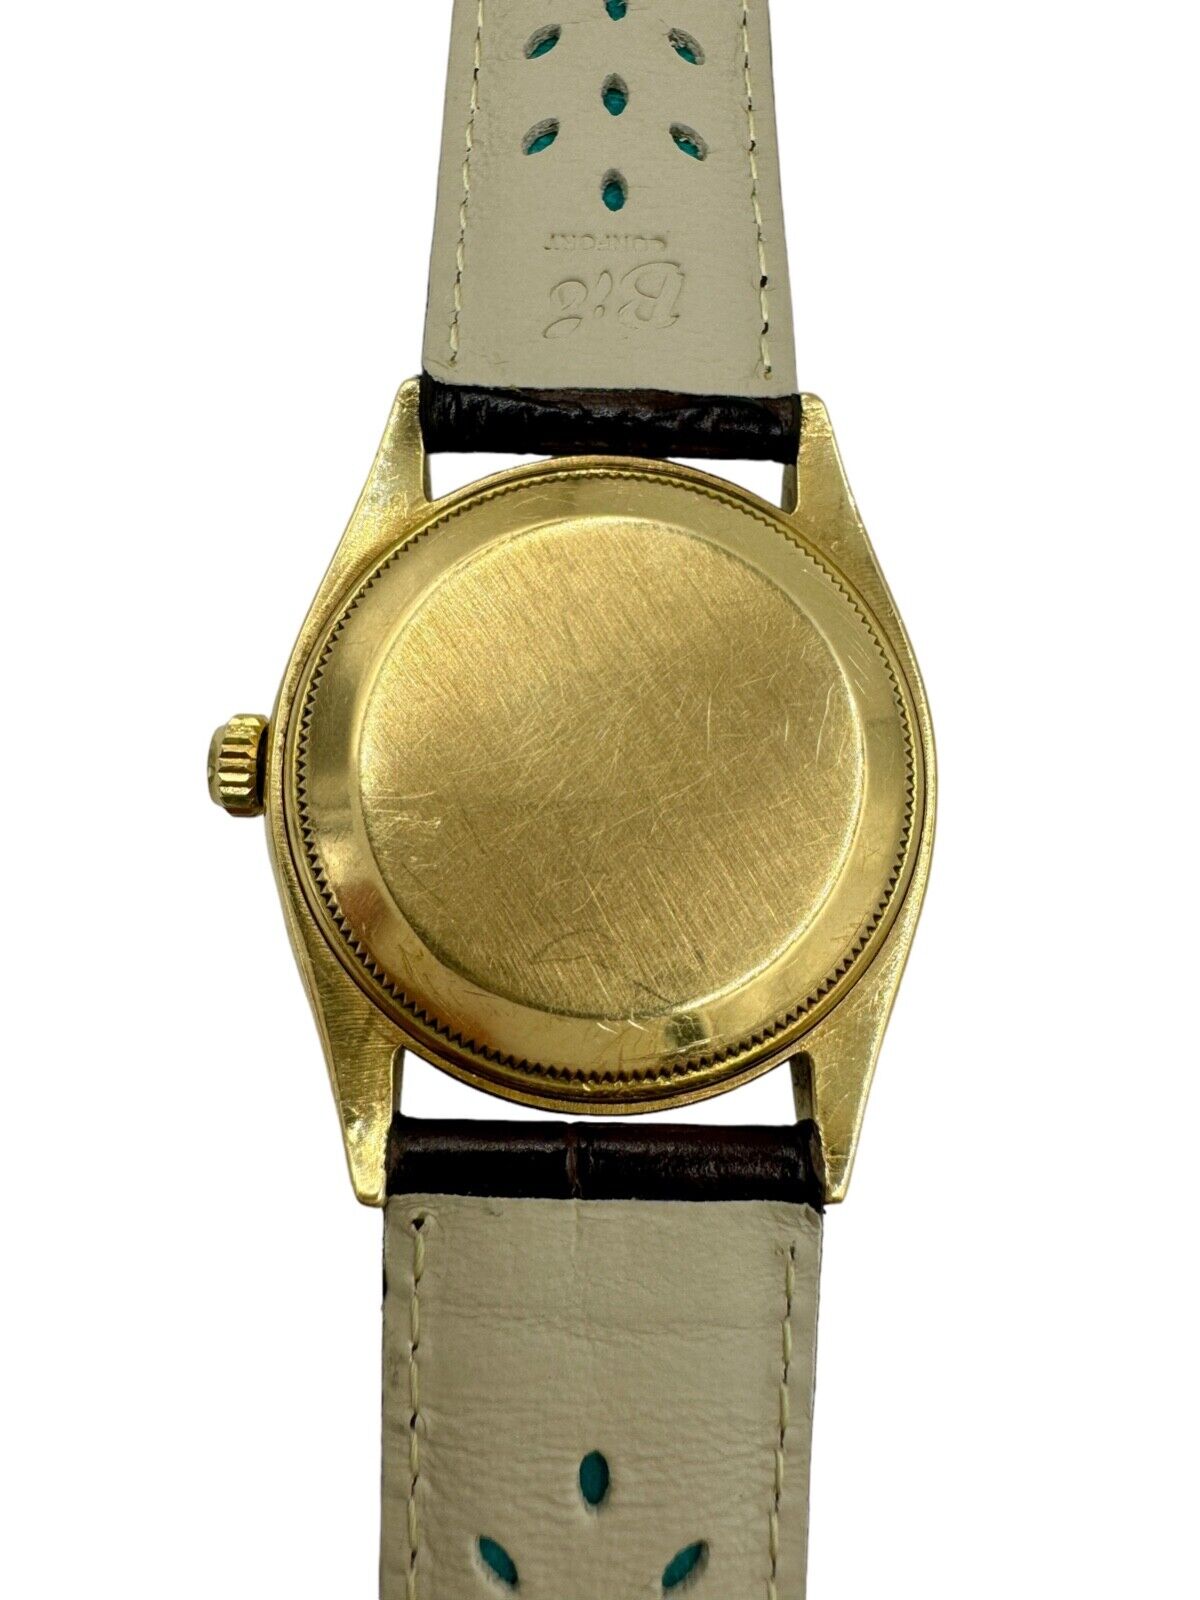 1967 Rolex Oyster Perpetual 18K Gold  34mm Watch Ref. 6564